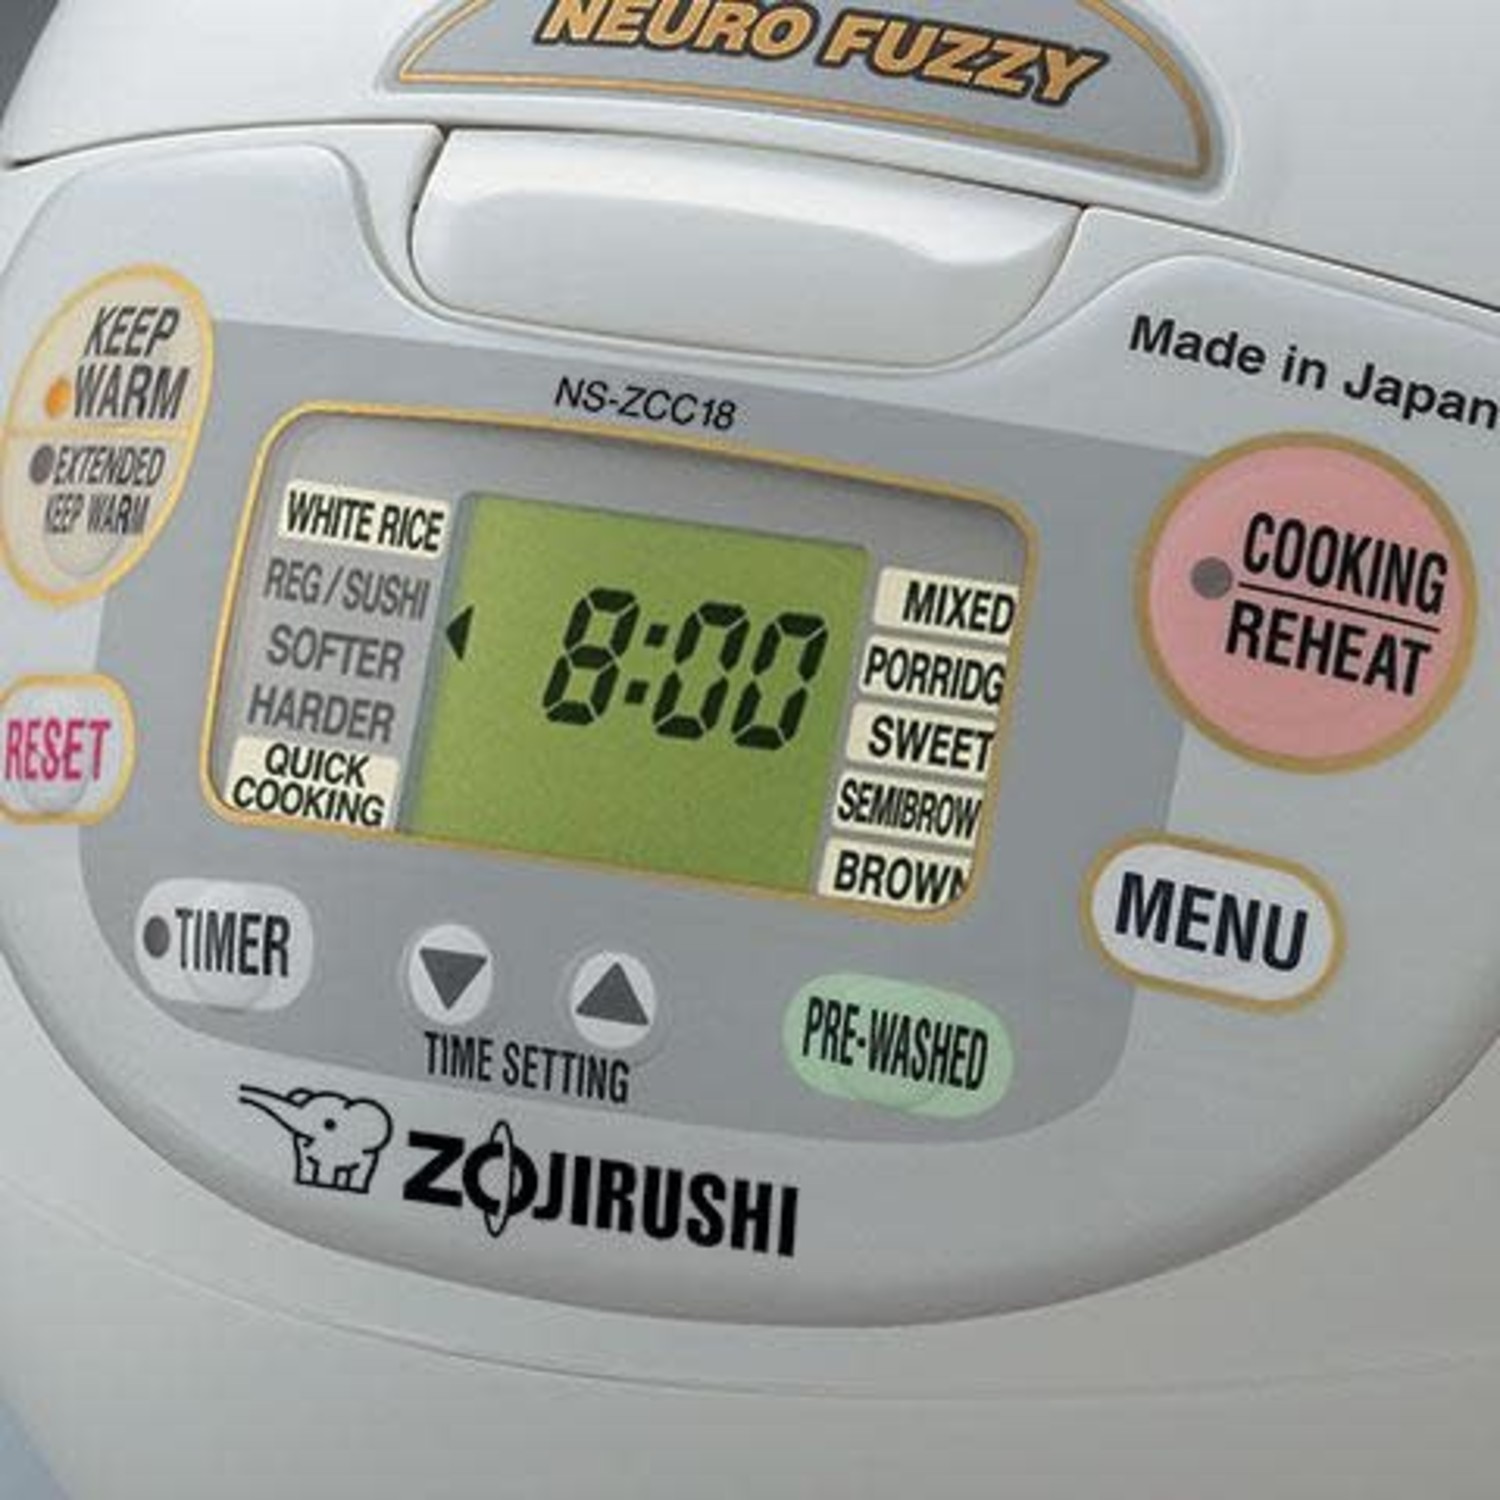 rice cooker, 5.5cup neuro fuzzy - Whisk